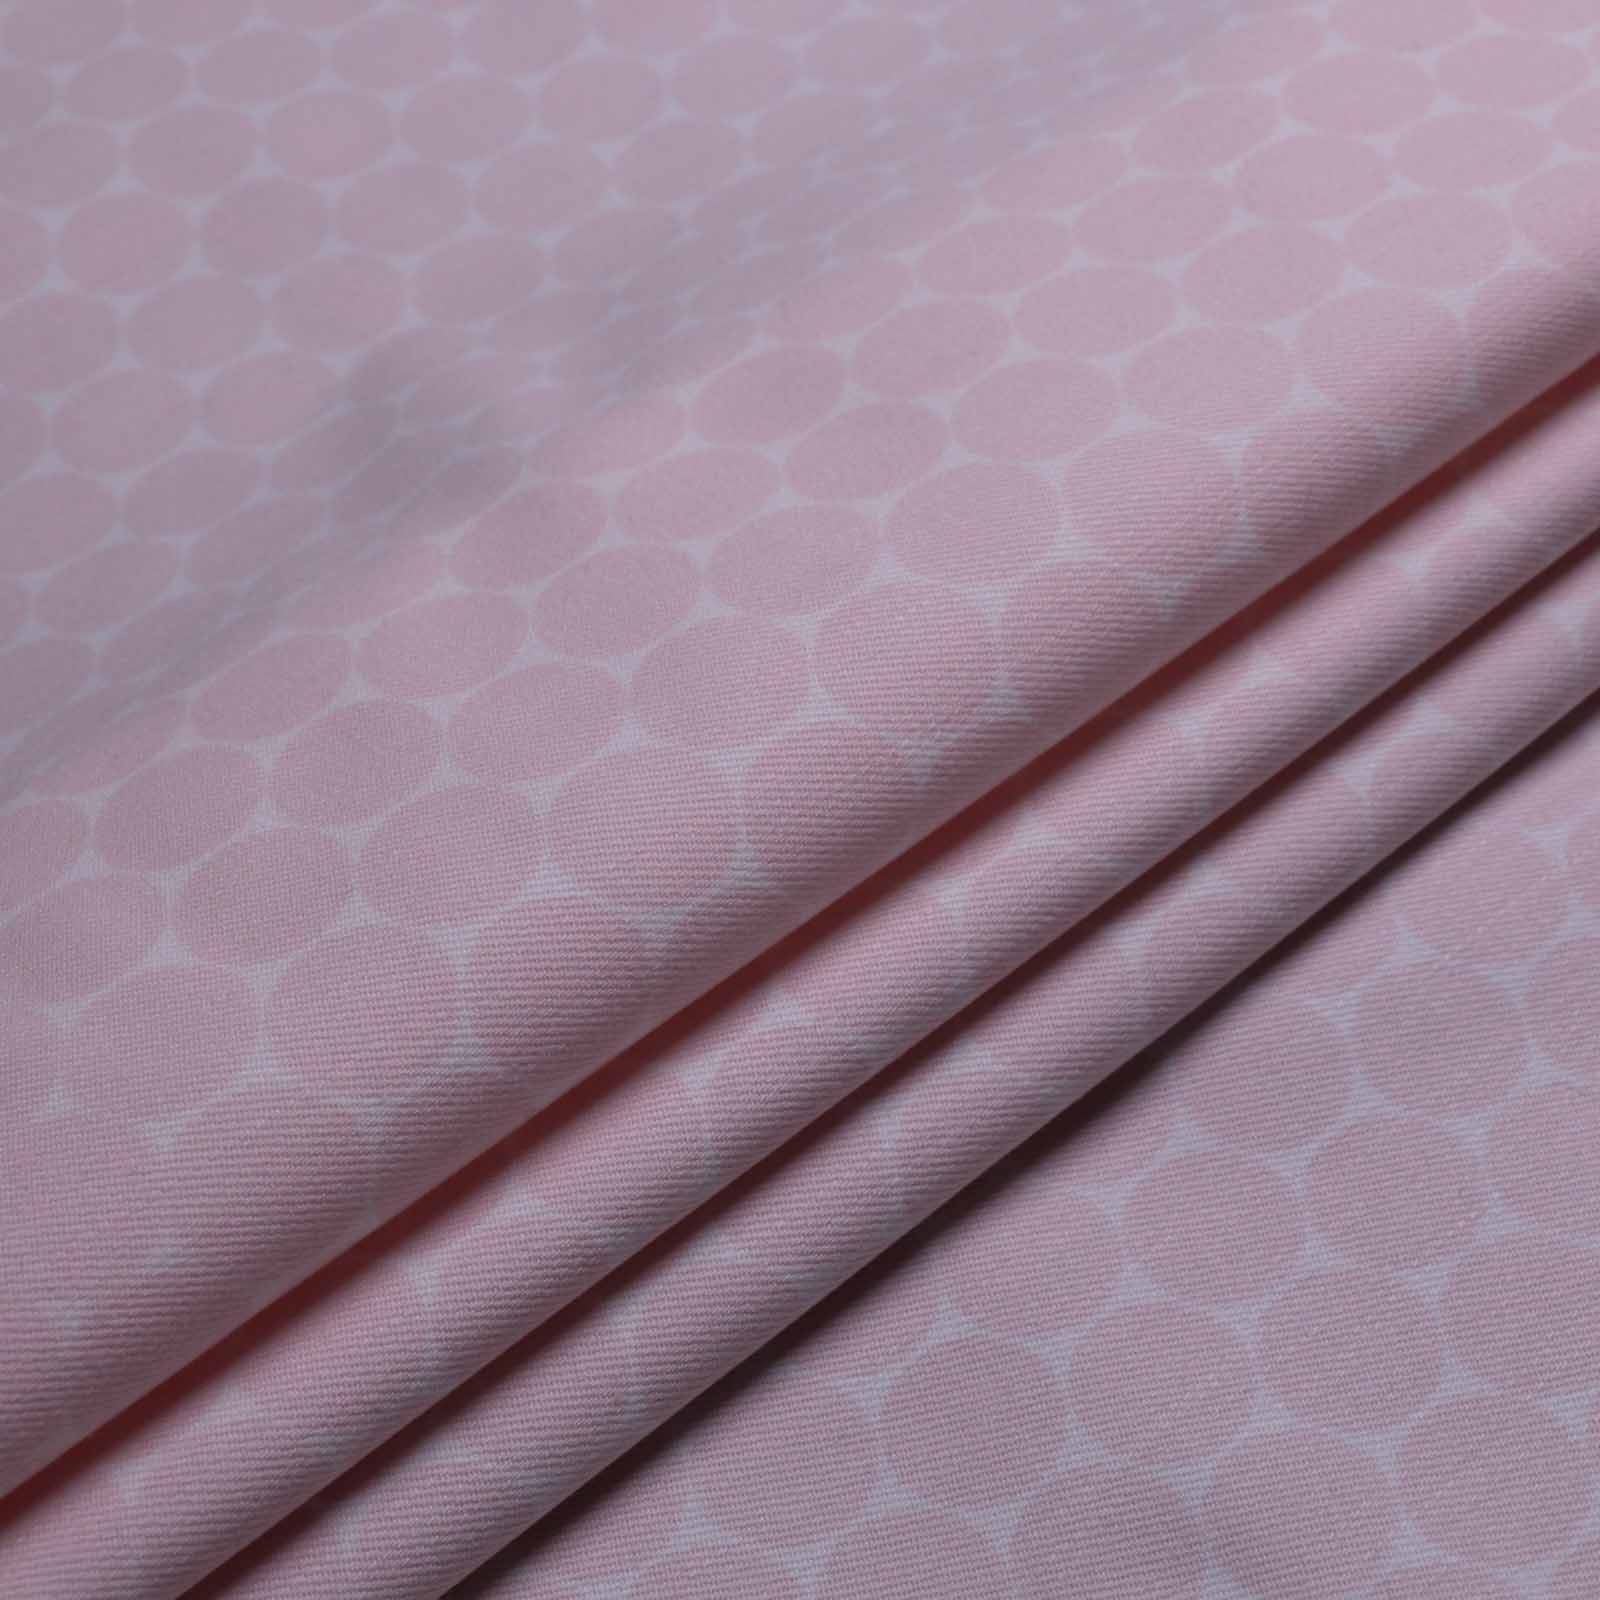 folded pale pink dot pattern on white stretchy cotton twill dressmaking fabric